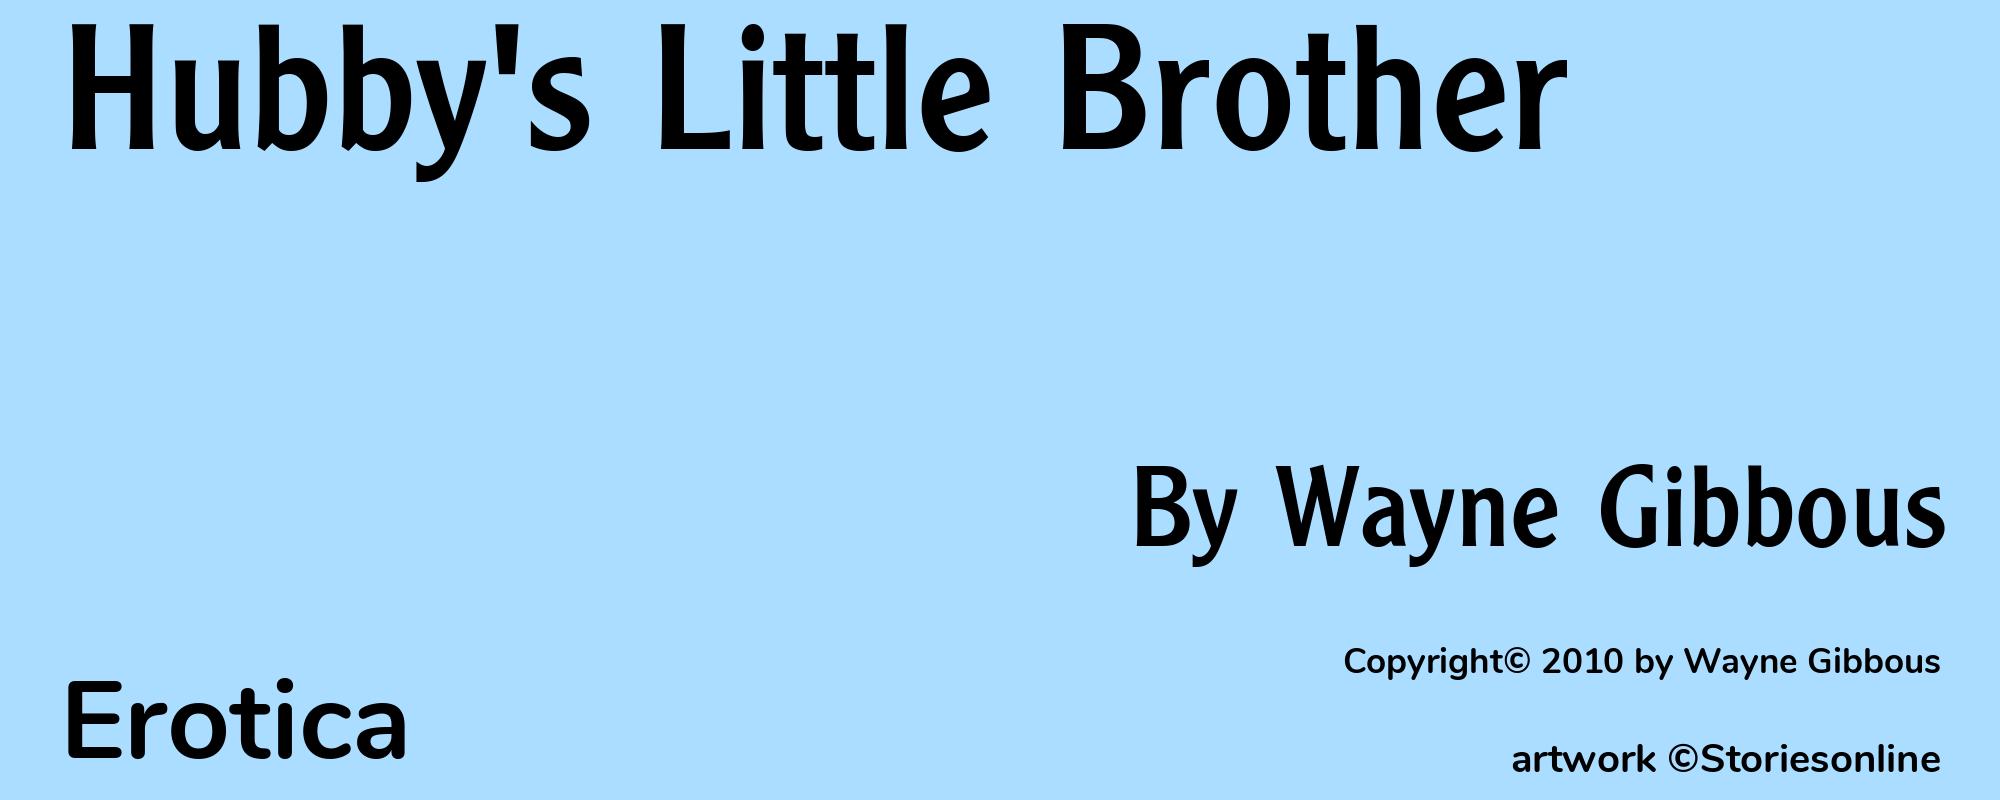 Hubby's Little Brother - Cover